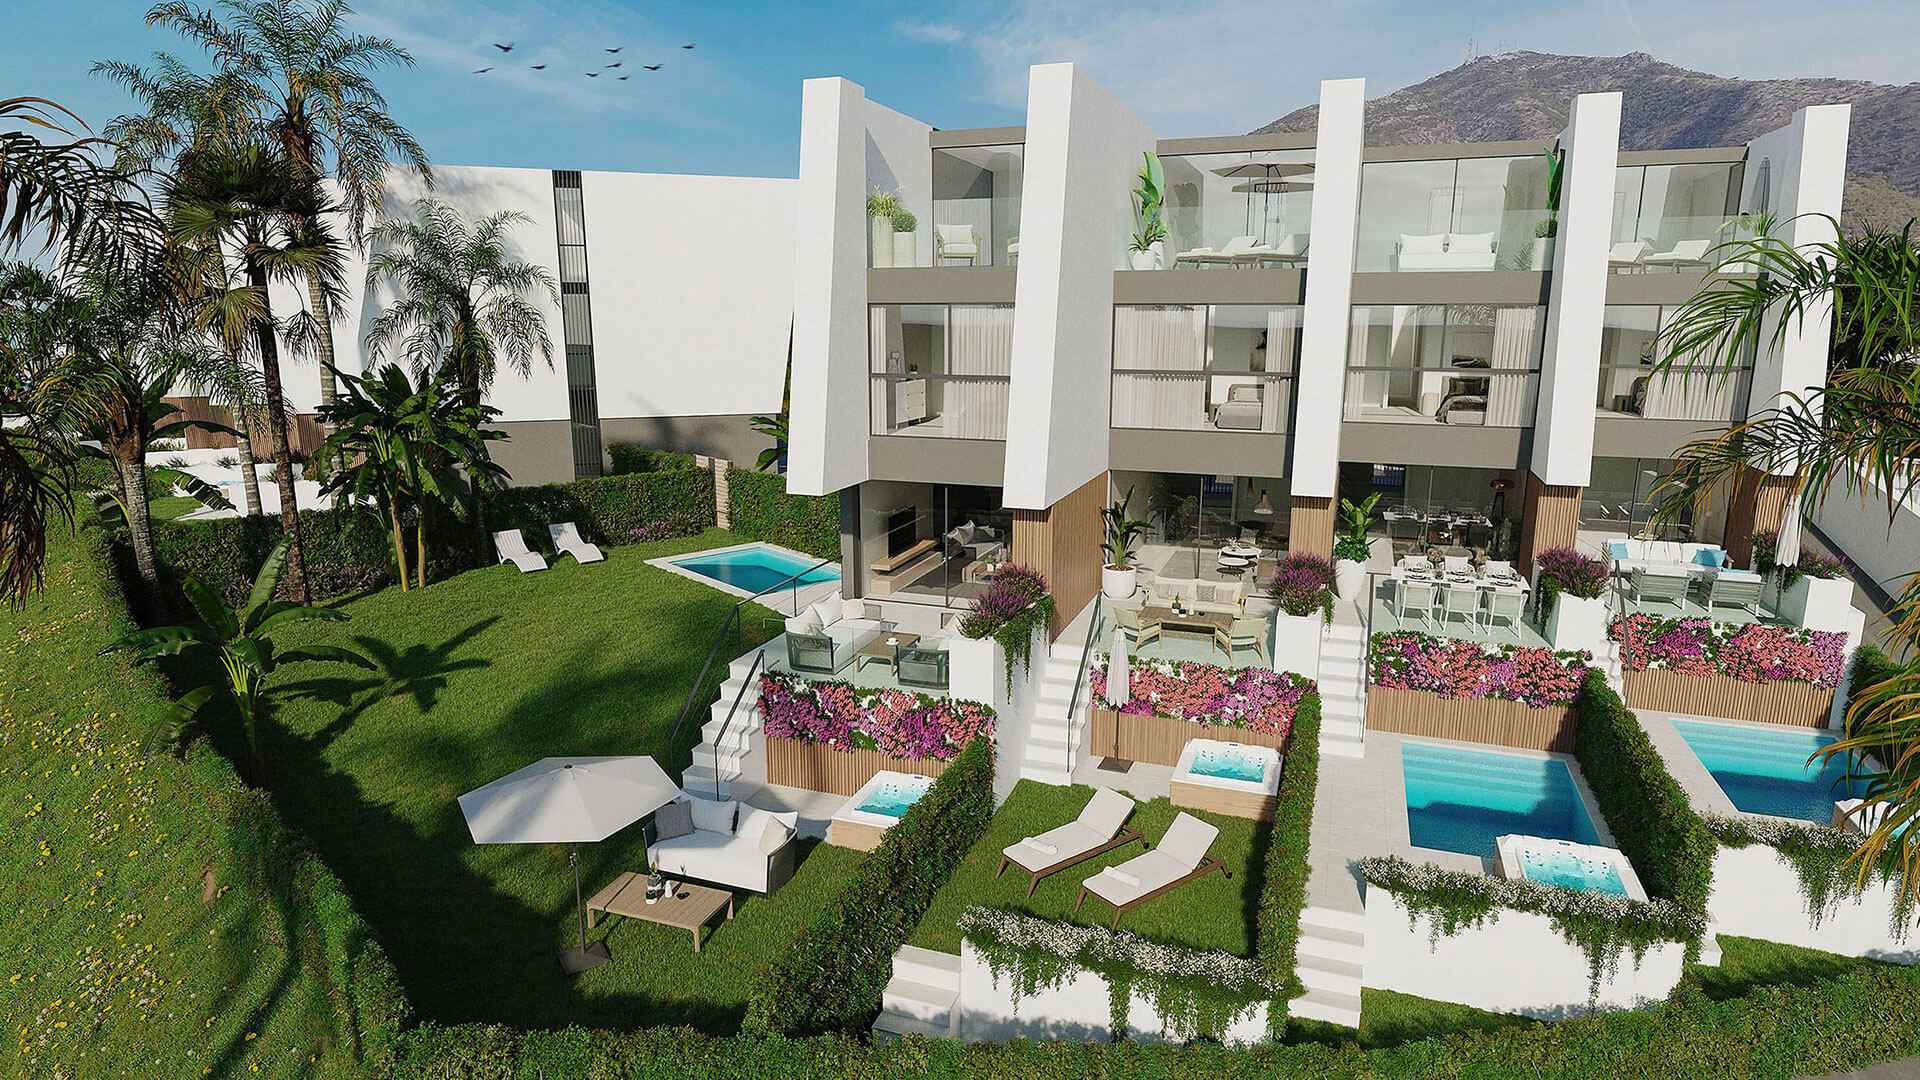 Azure Bay - New Property For Sale in Fuengirola